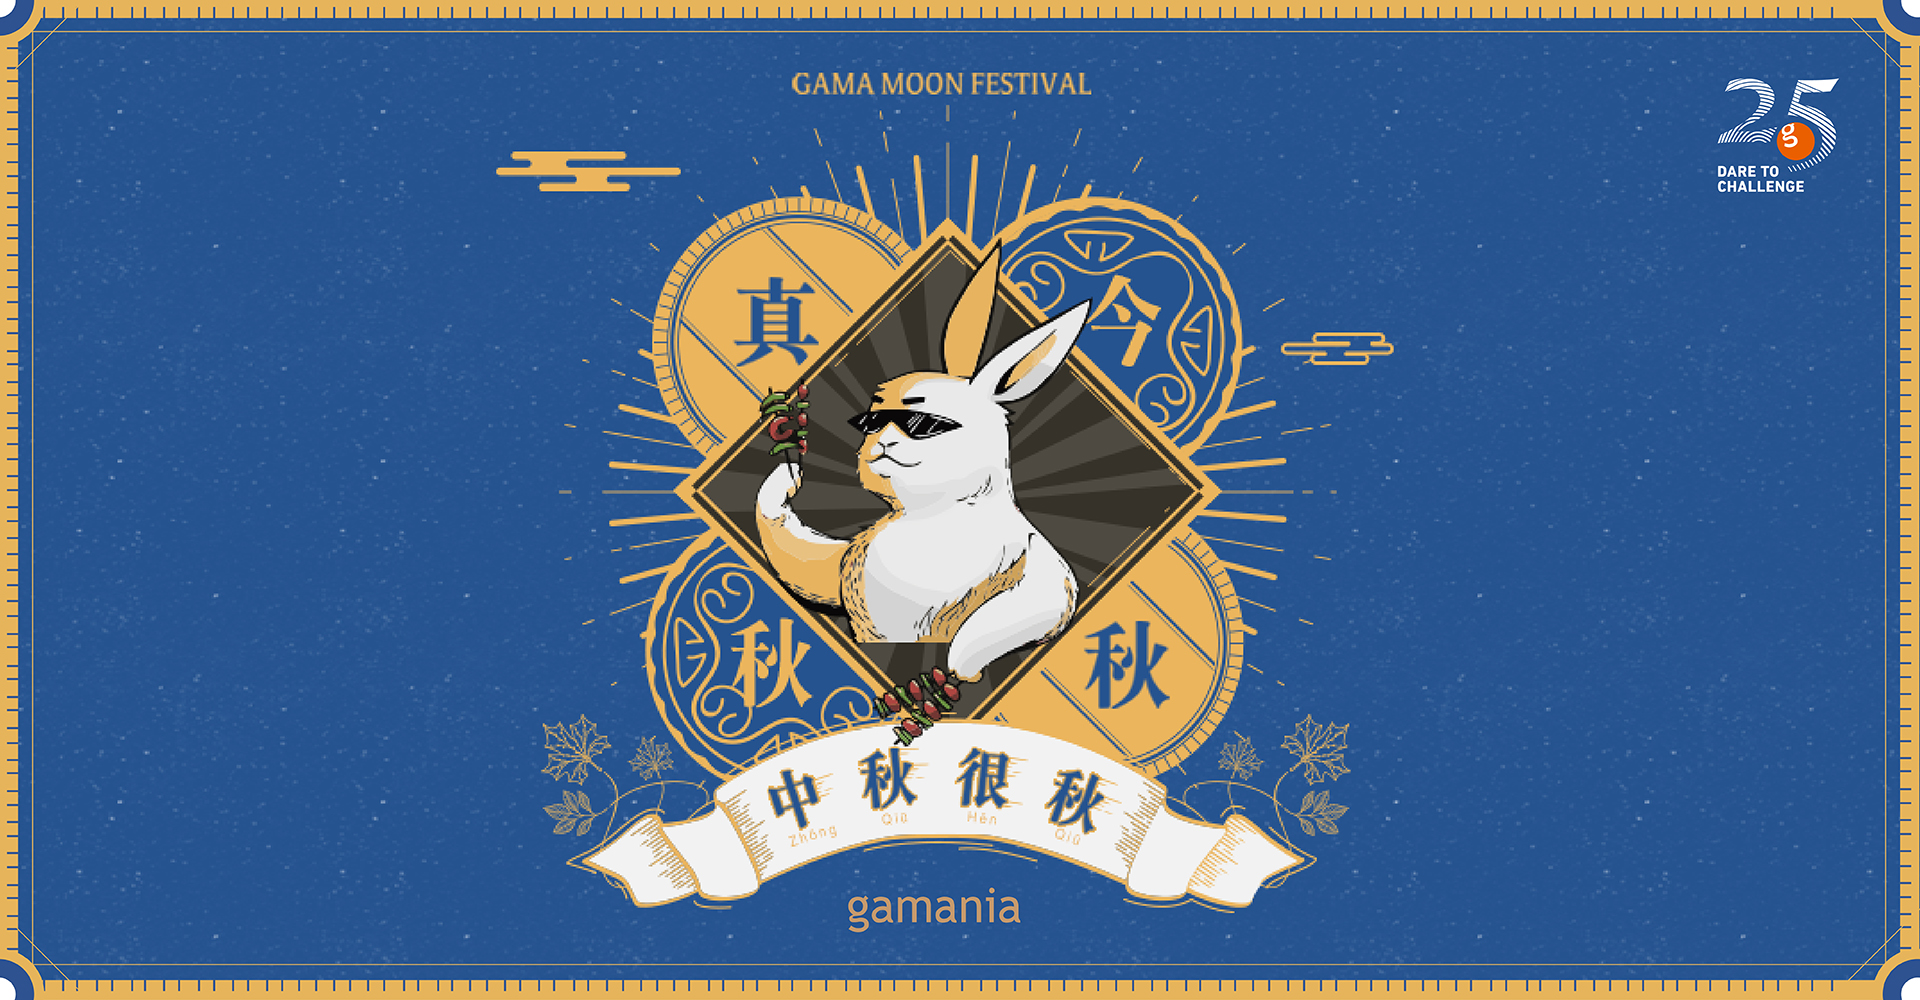 GAMA MOON FESTIVAL 2020: To the worst year, only more over the moon in this moon festival!